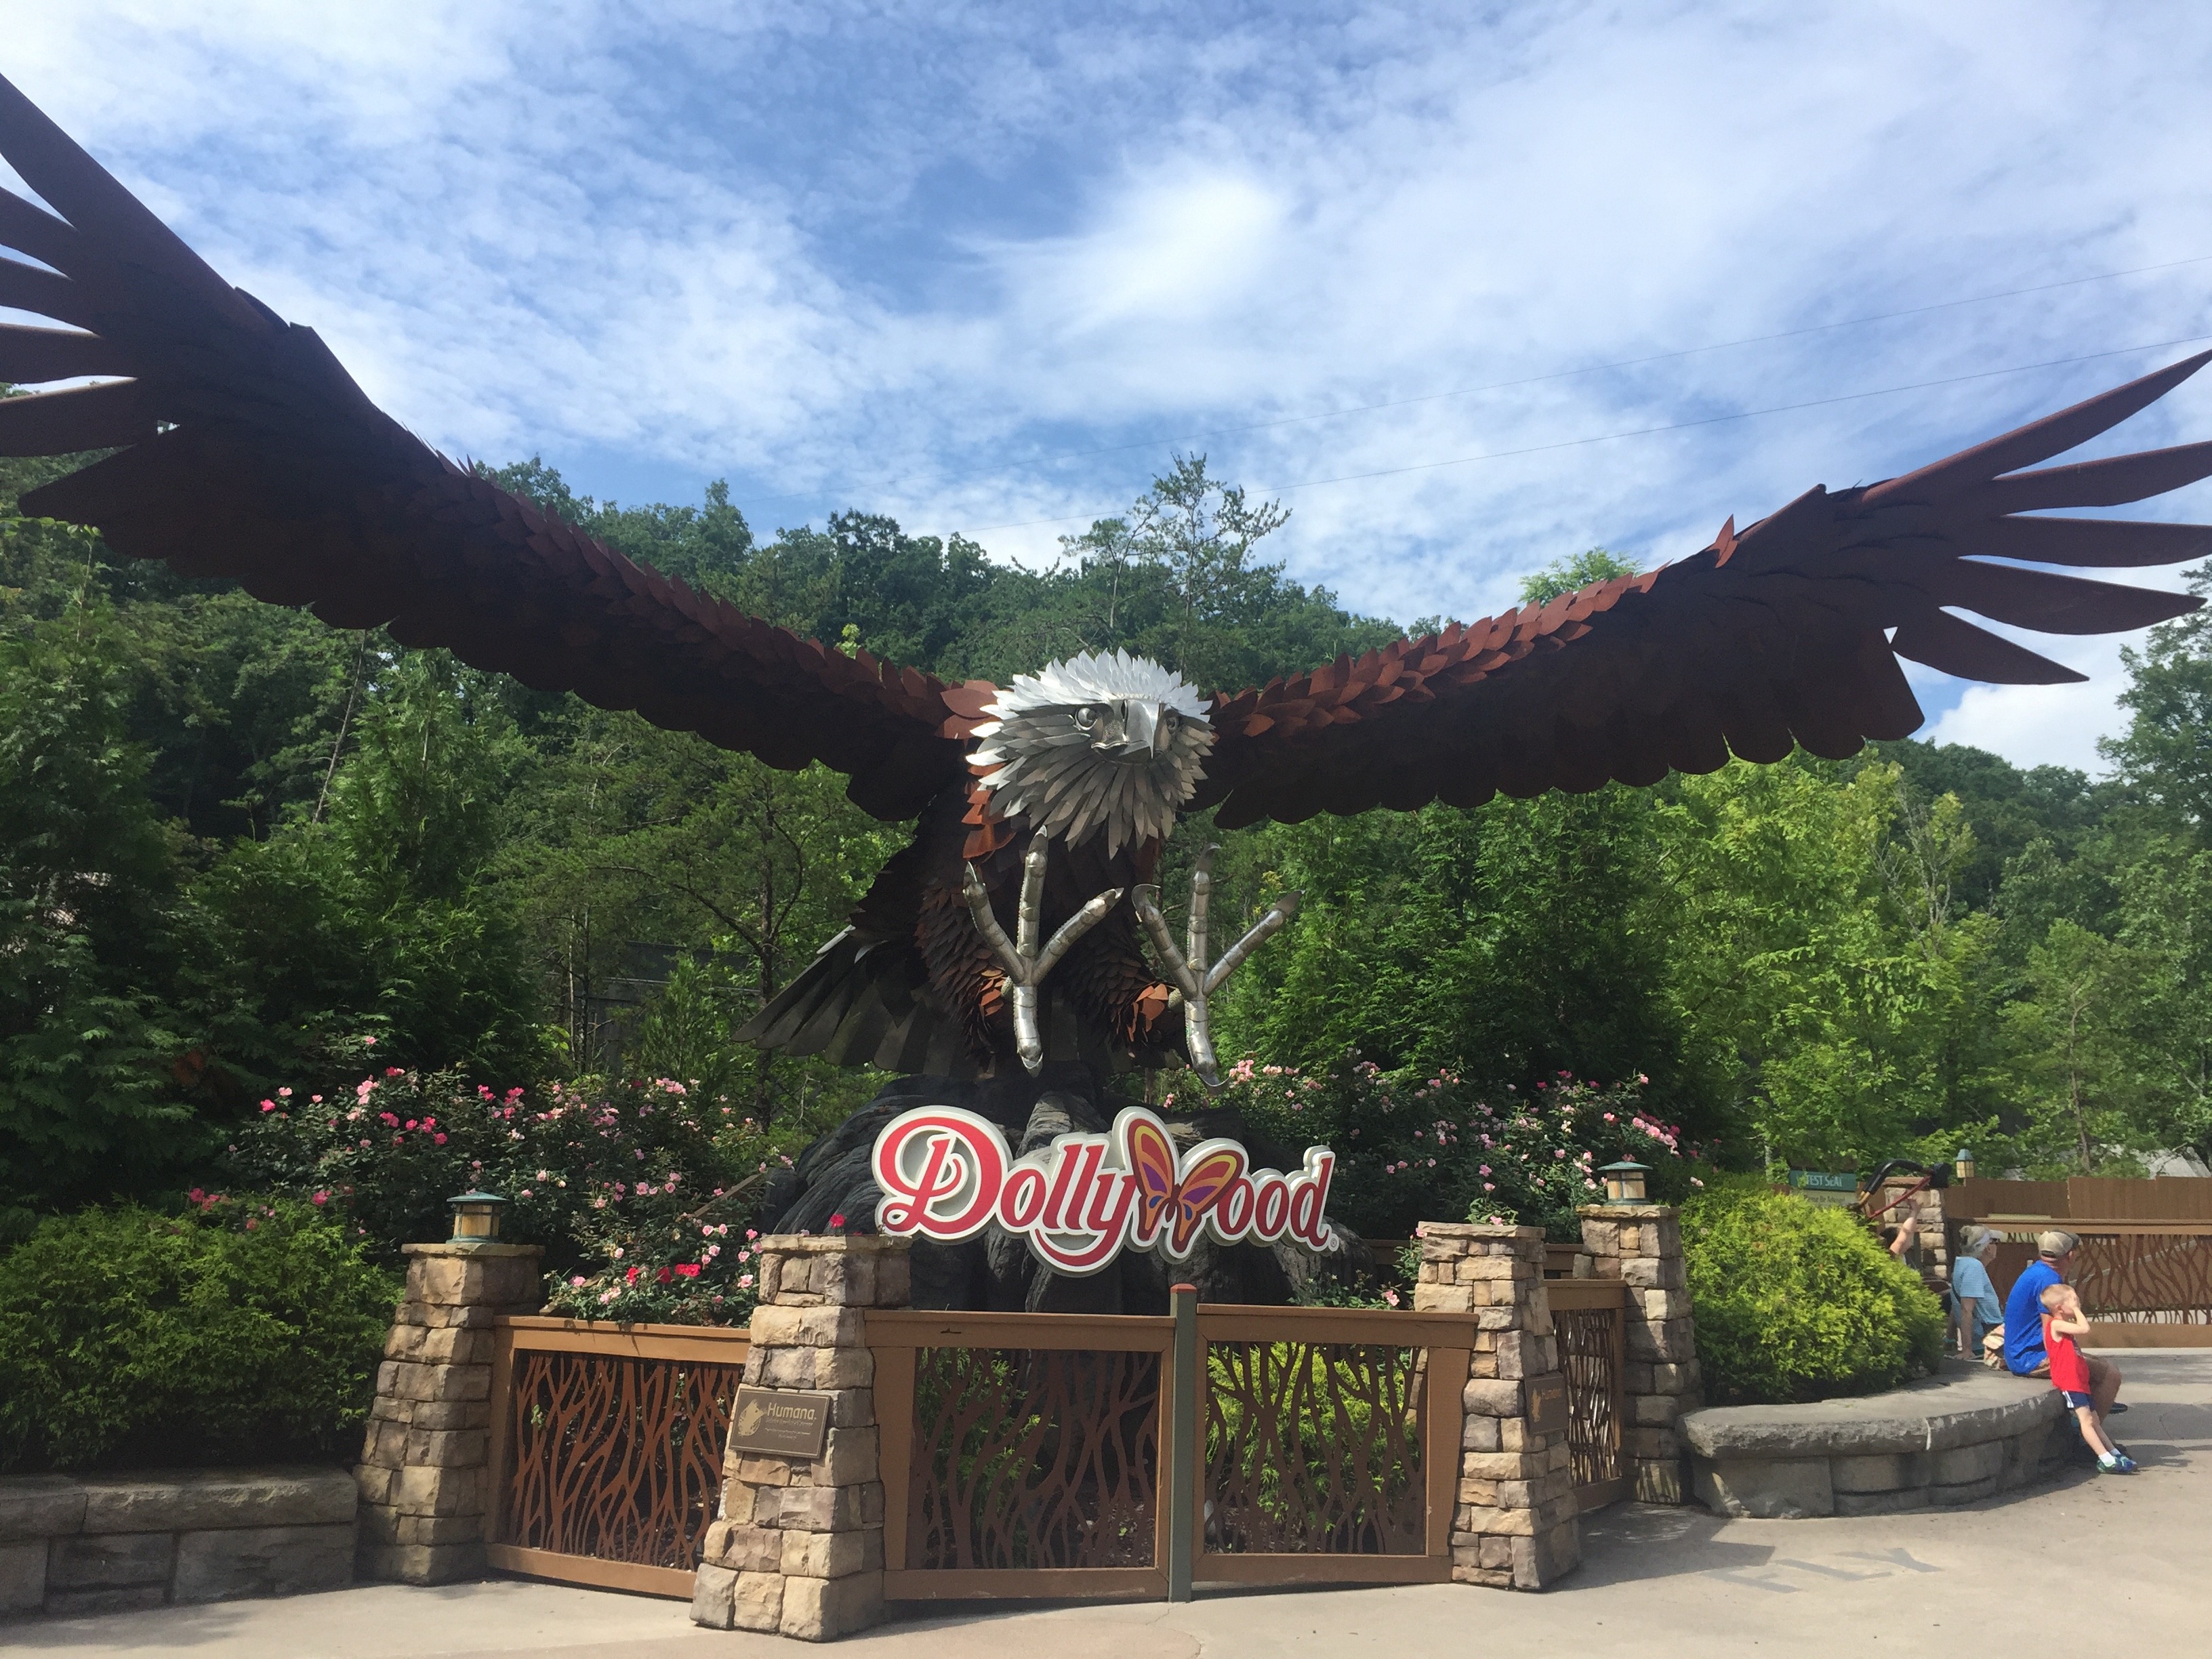 Dollywood Tickets - Pigeon Forge, TN | Dollywood Theme Park3264 x 2448